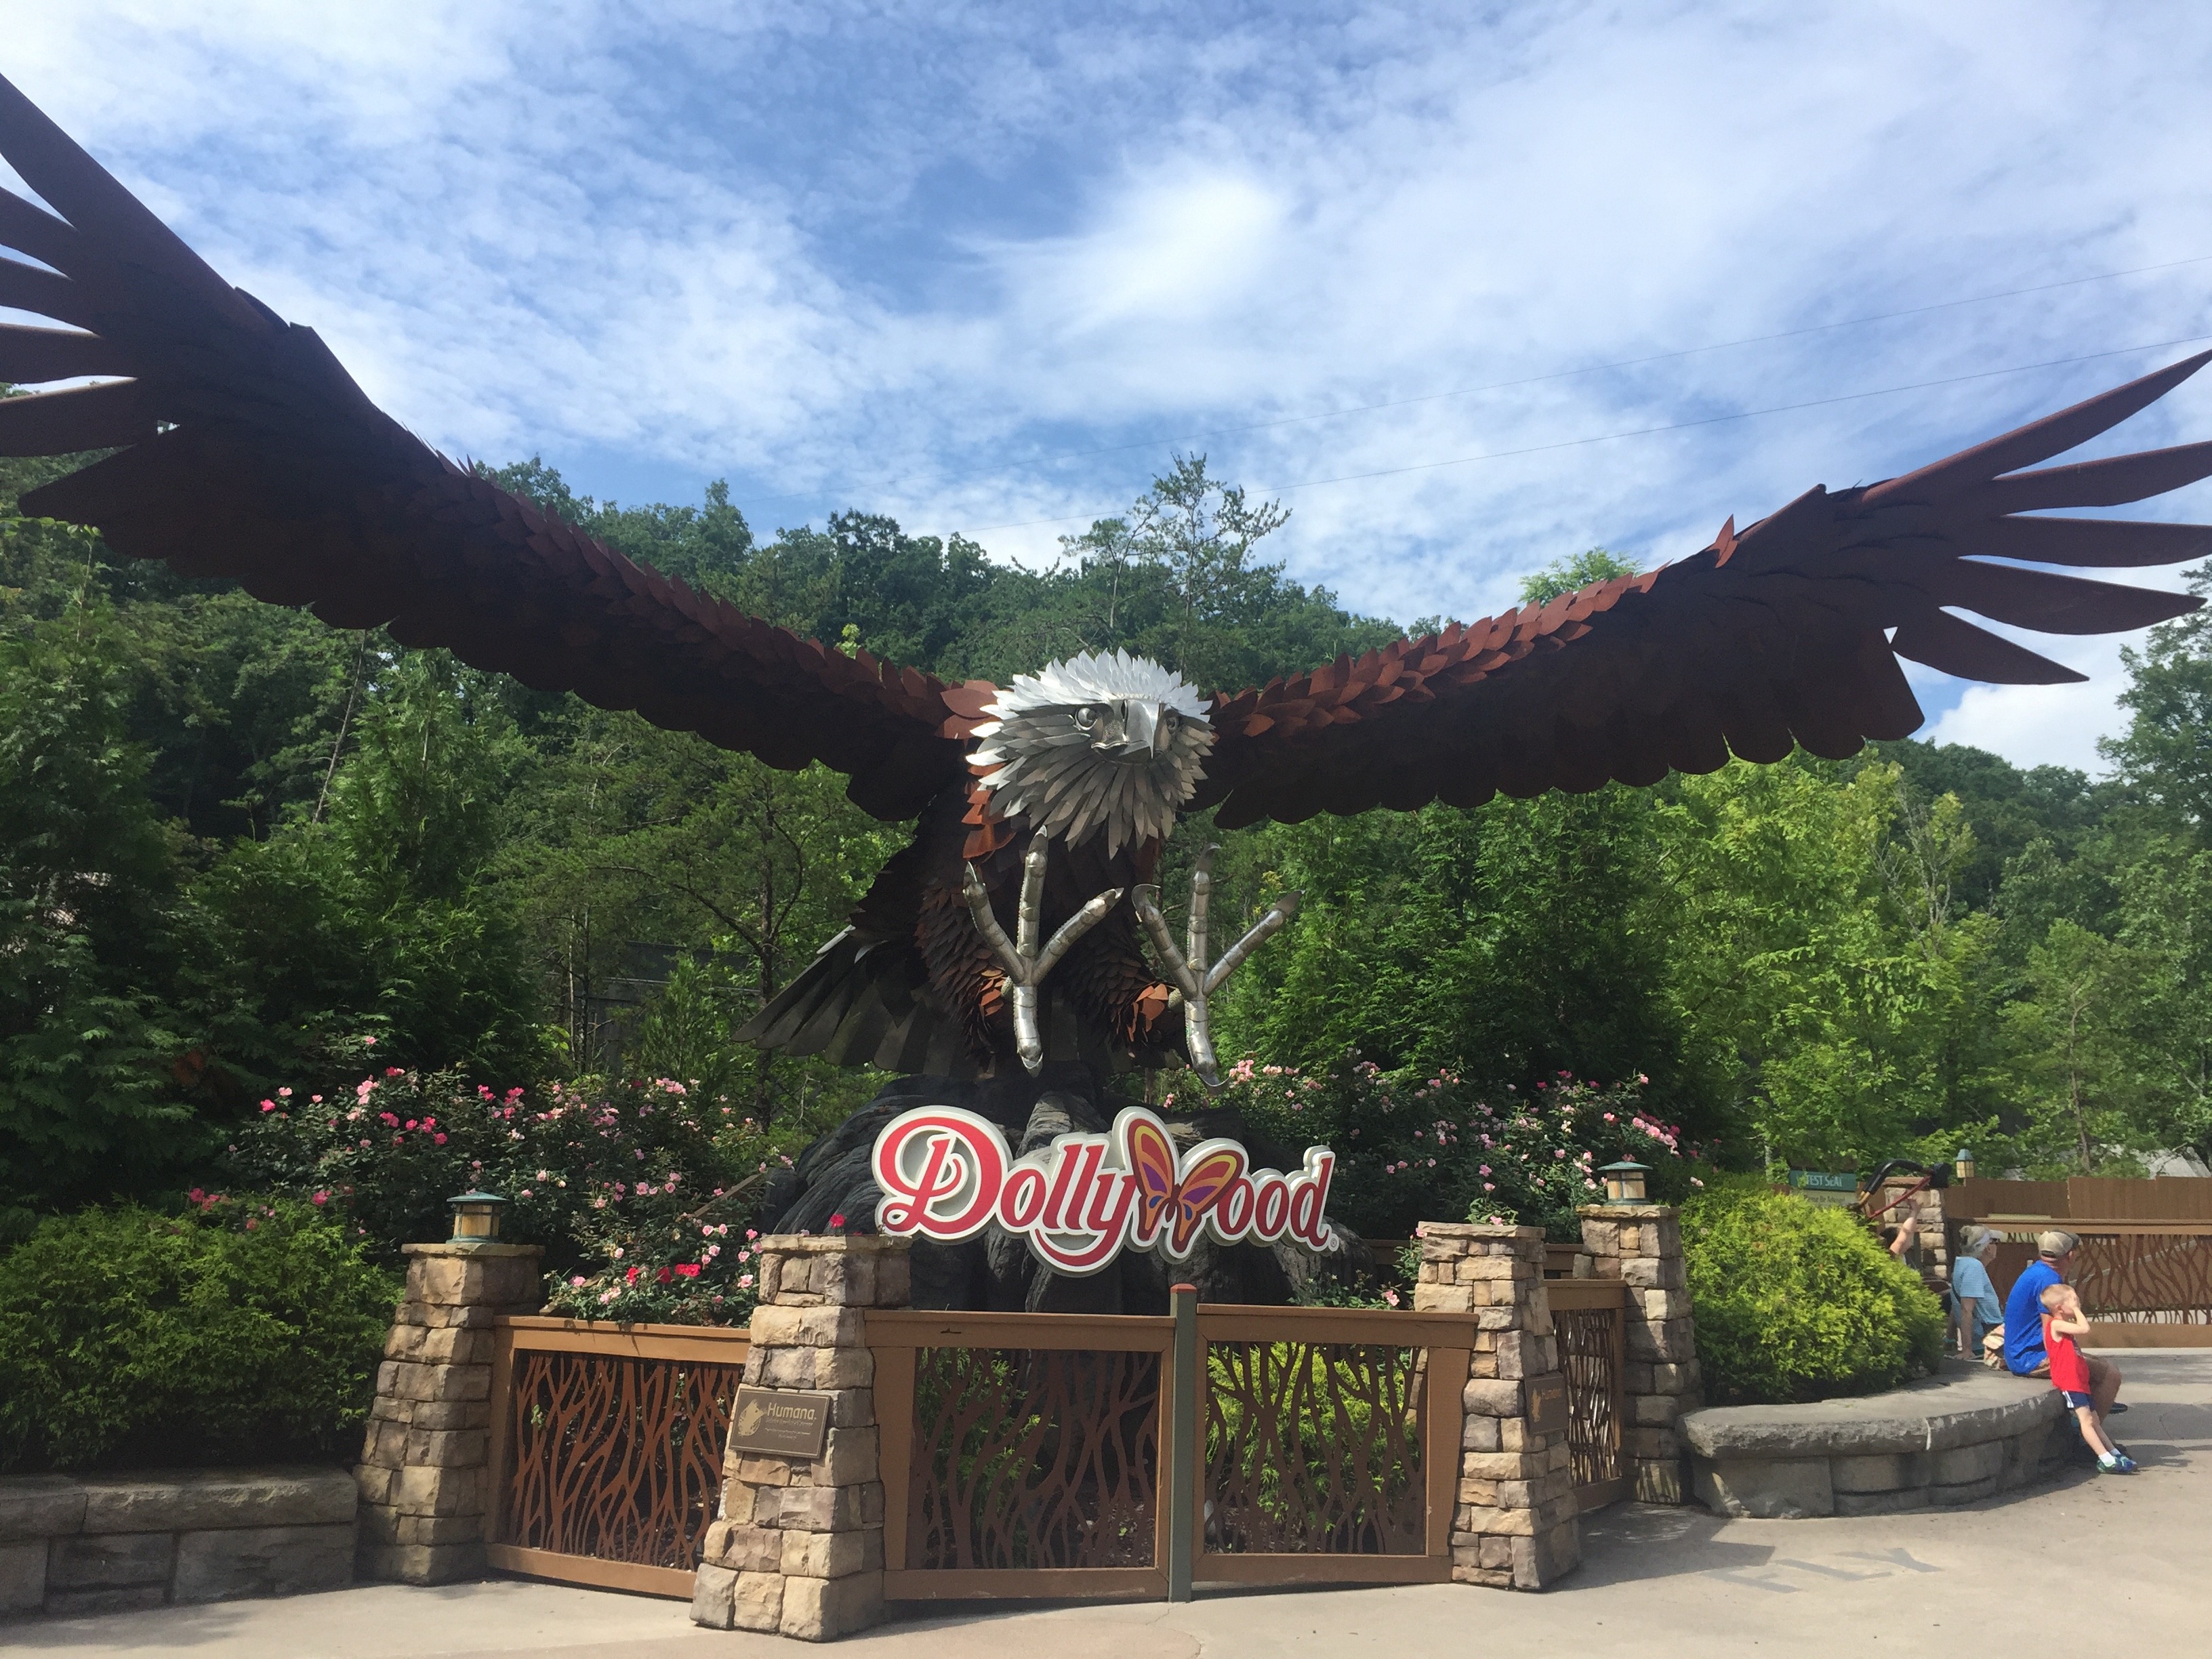 Dollywood Tickets - Pigeon Forge, TN | Dollywood Theme Park3264 x 2448